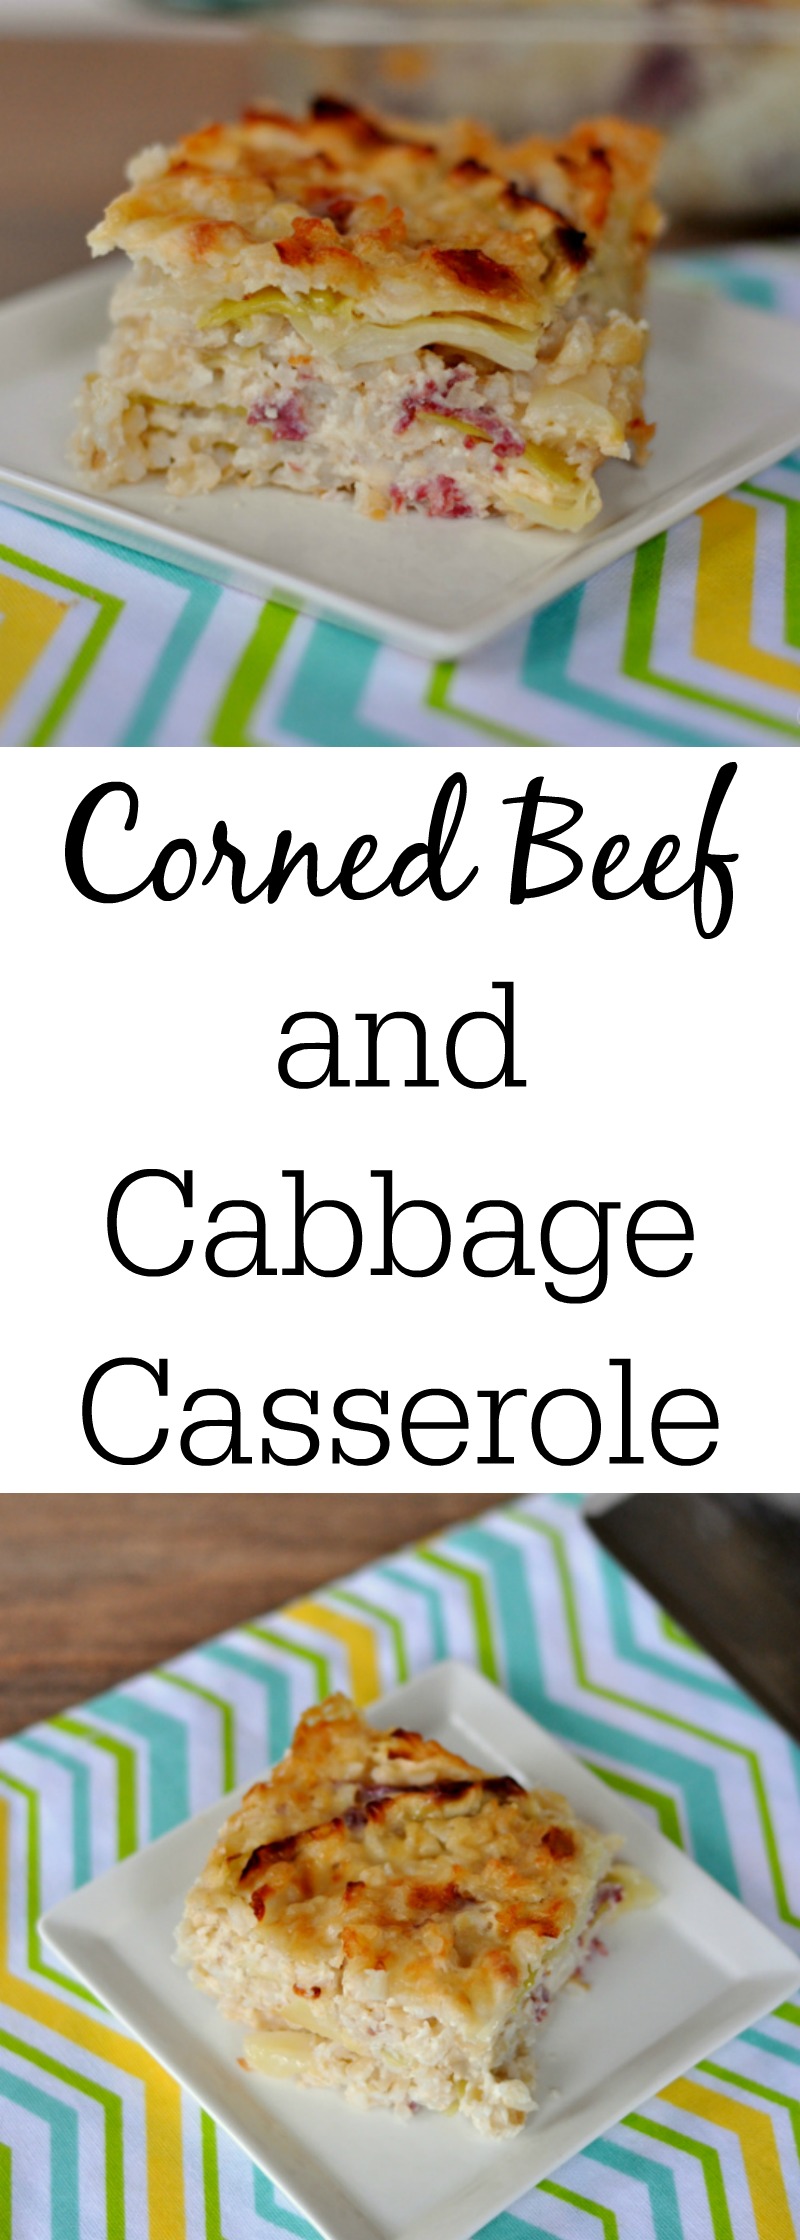 Corned Beef and Cabbage Casserole - A Yummy Traditional Irish Food!